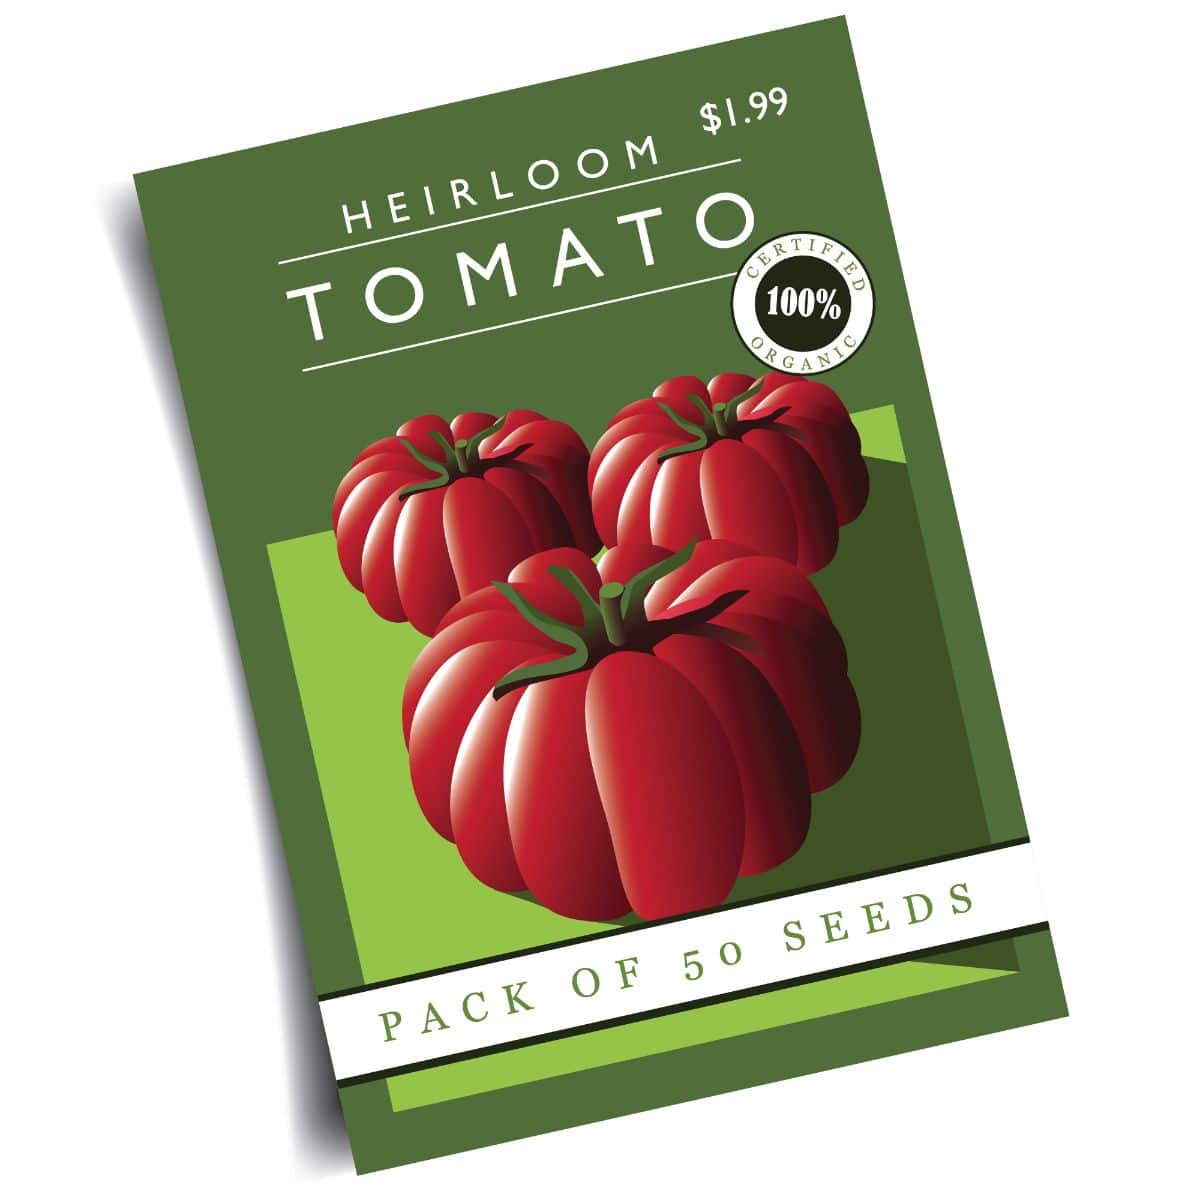 A packet of tomato seeds clearly labeled as heirloom